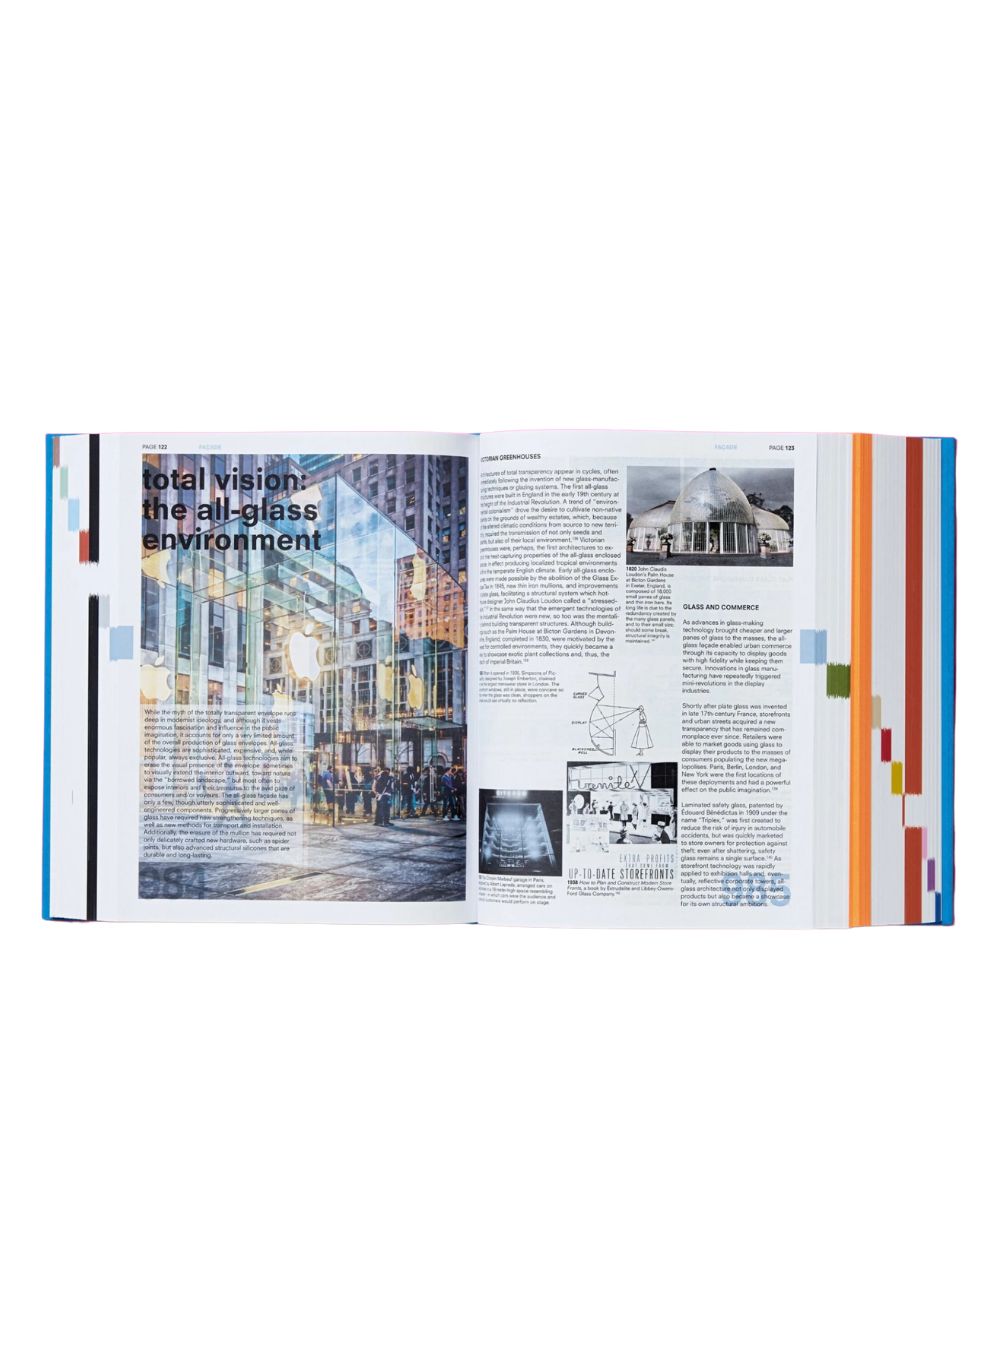 TASCHEN | Koolhaas Elements Of Architecture Book